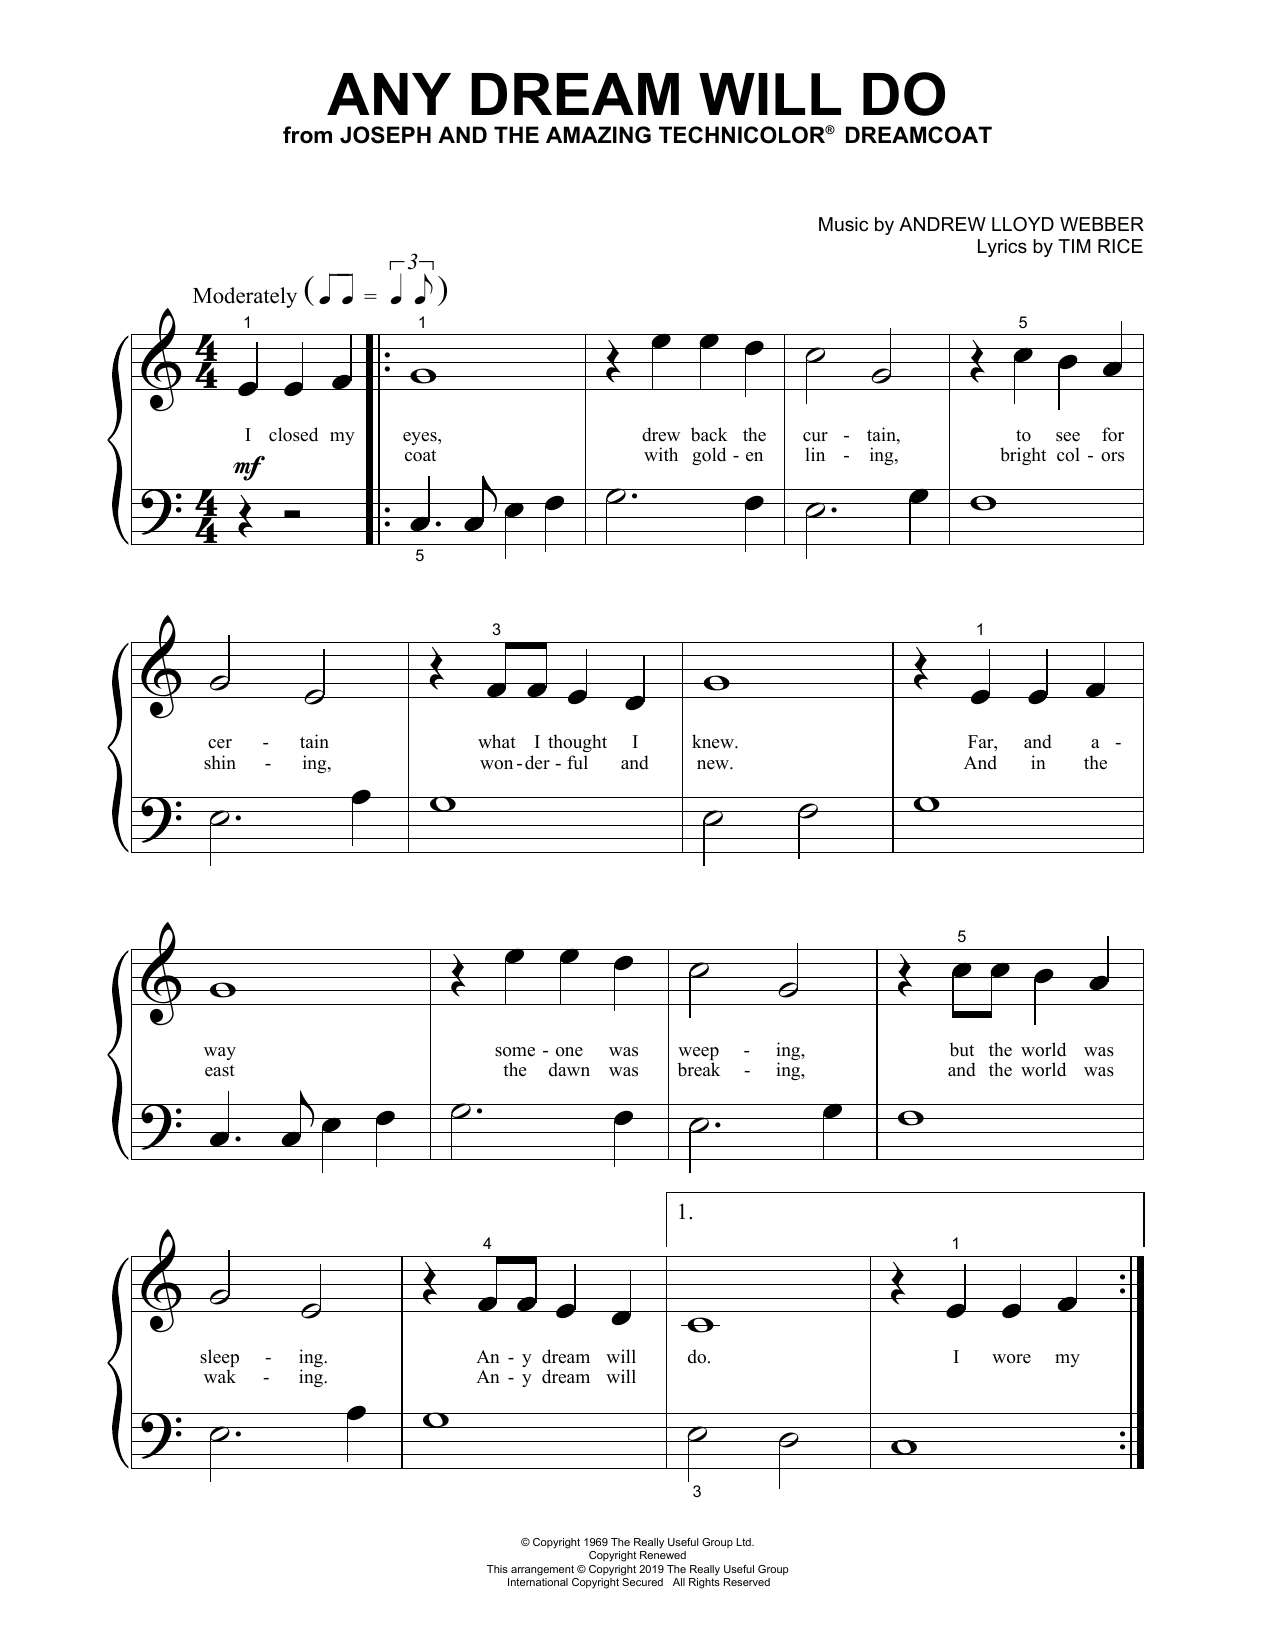 Andrew Lloyd Webber & Tim Rice Any Dream Will Do sheet music notes and chords. Download Printable PDF.